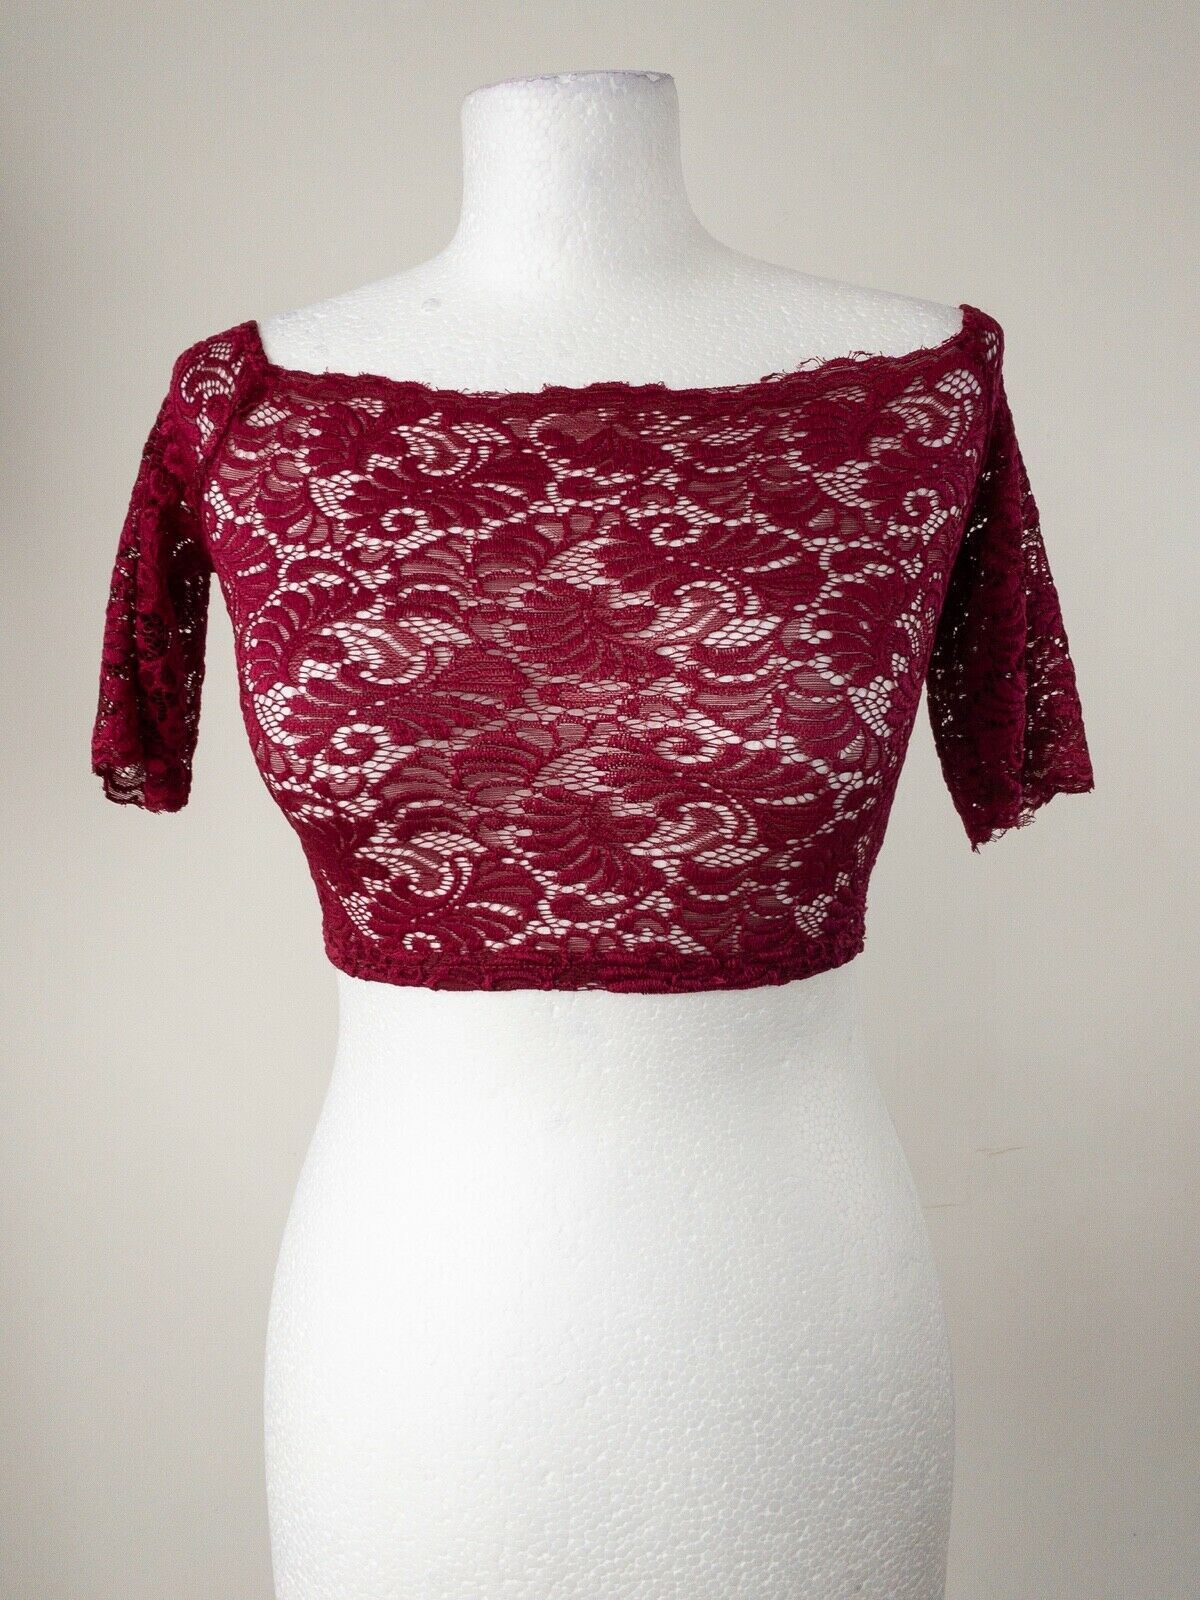 Miss Holly 2-piece Skirt and Lace Crop Top Burgundy Sizes